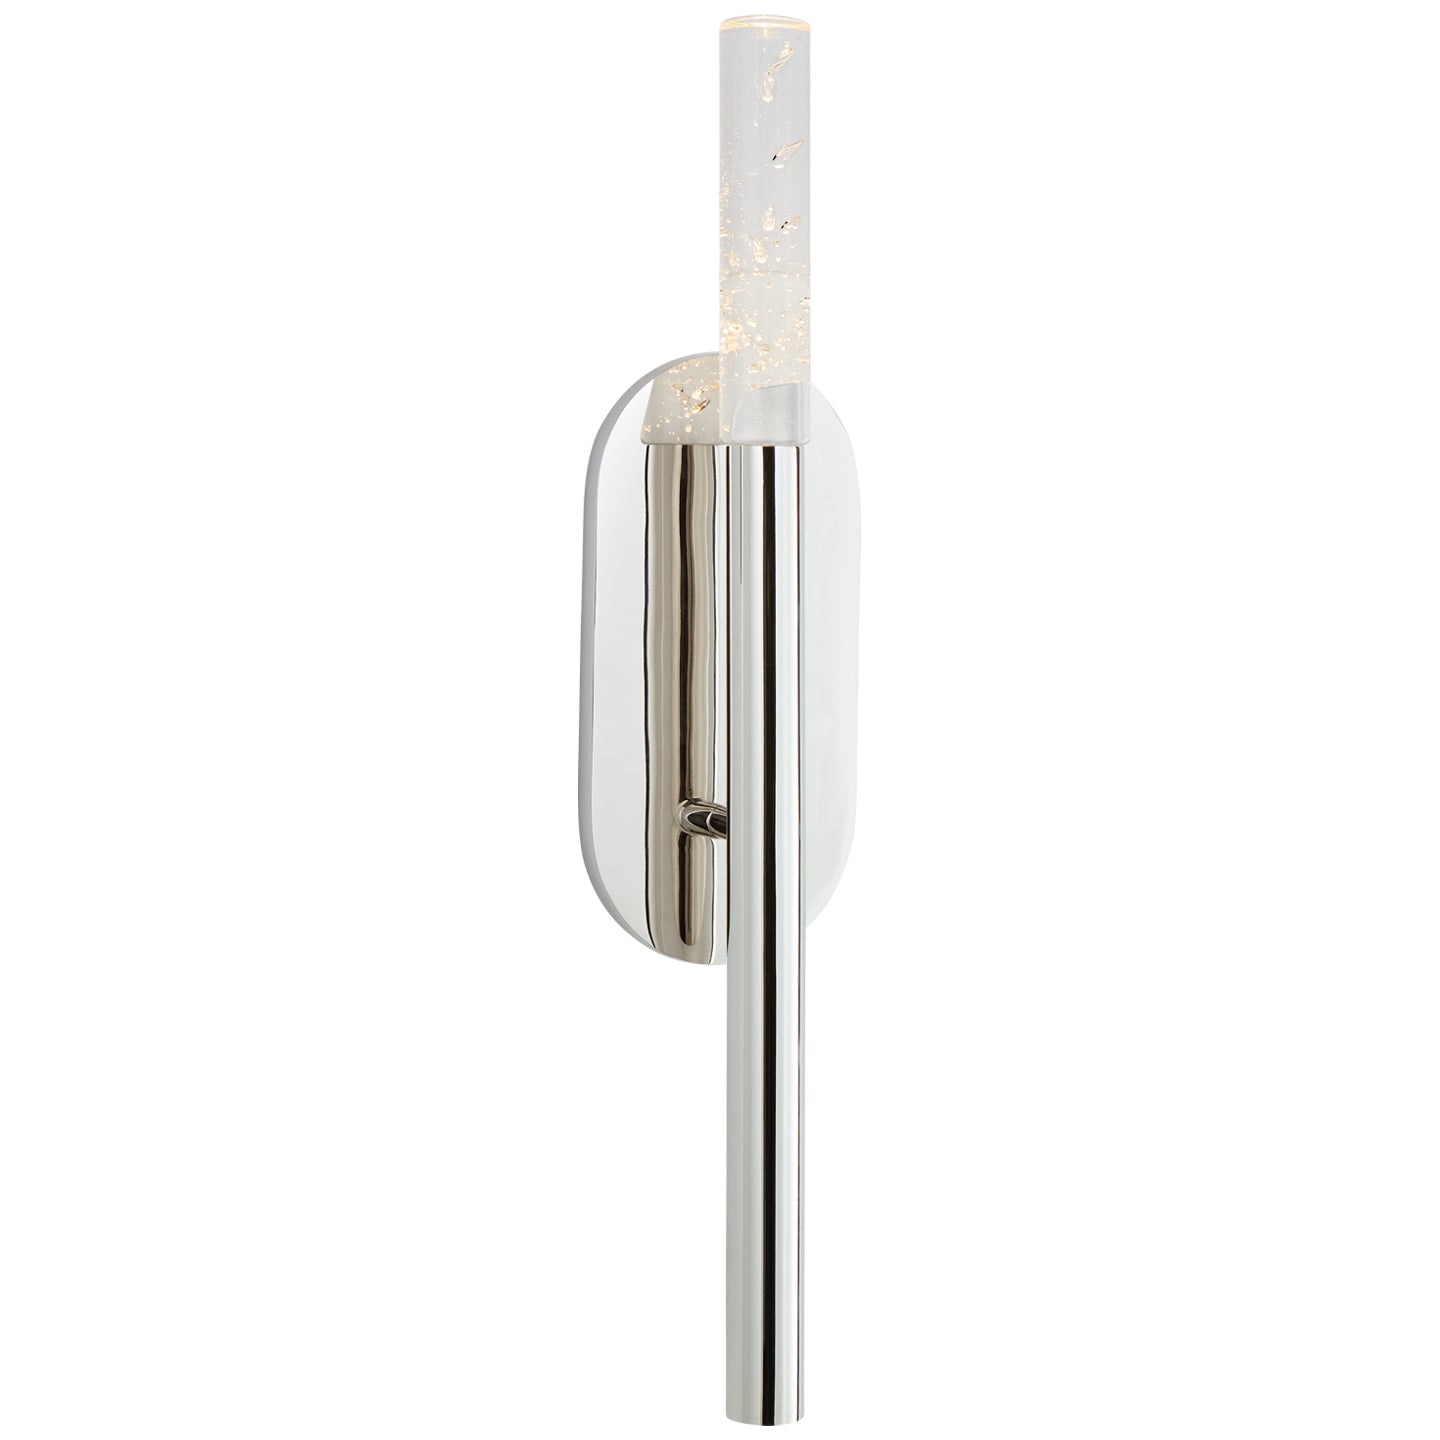 Load image into Gallery viewer, Visual Comfort Signature - KW 2281PN-SG - LED Bath Sconce - Rousseau - Polished Nickel
